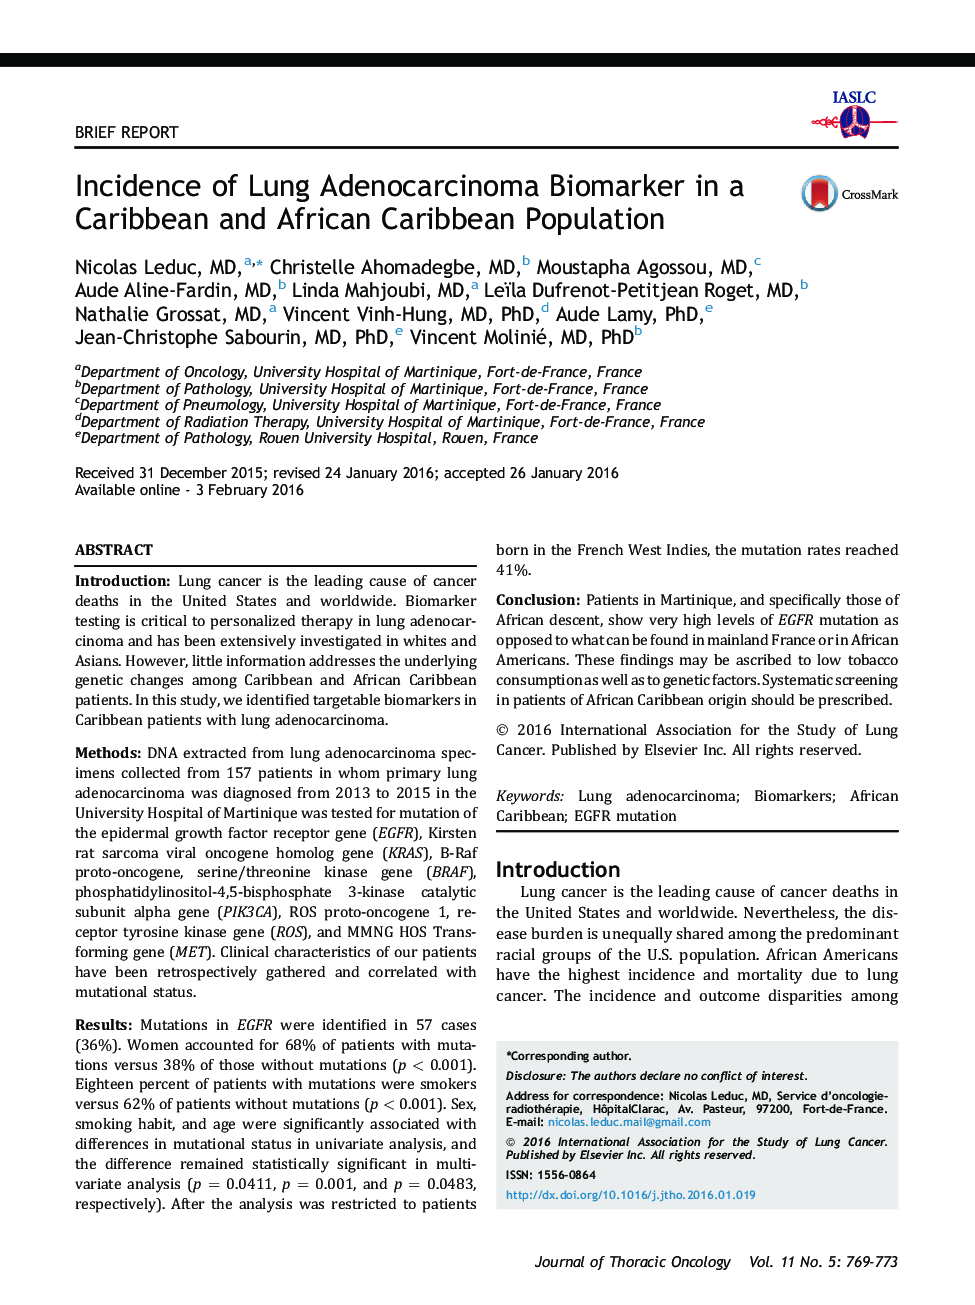 Incidence of Lung Adenocarcinoma Biomarker in a Caribbean and African Caribbean Population